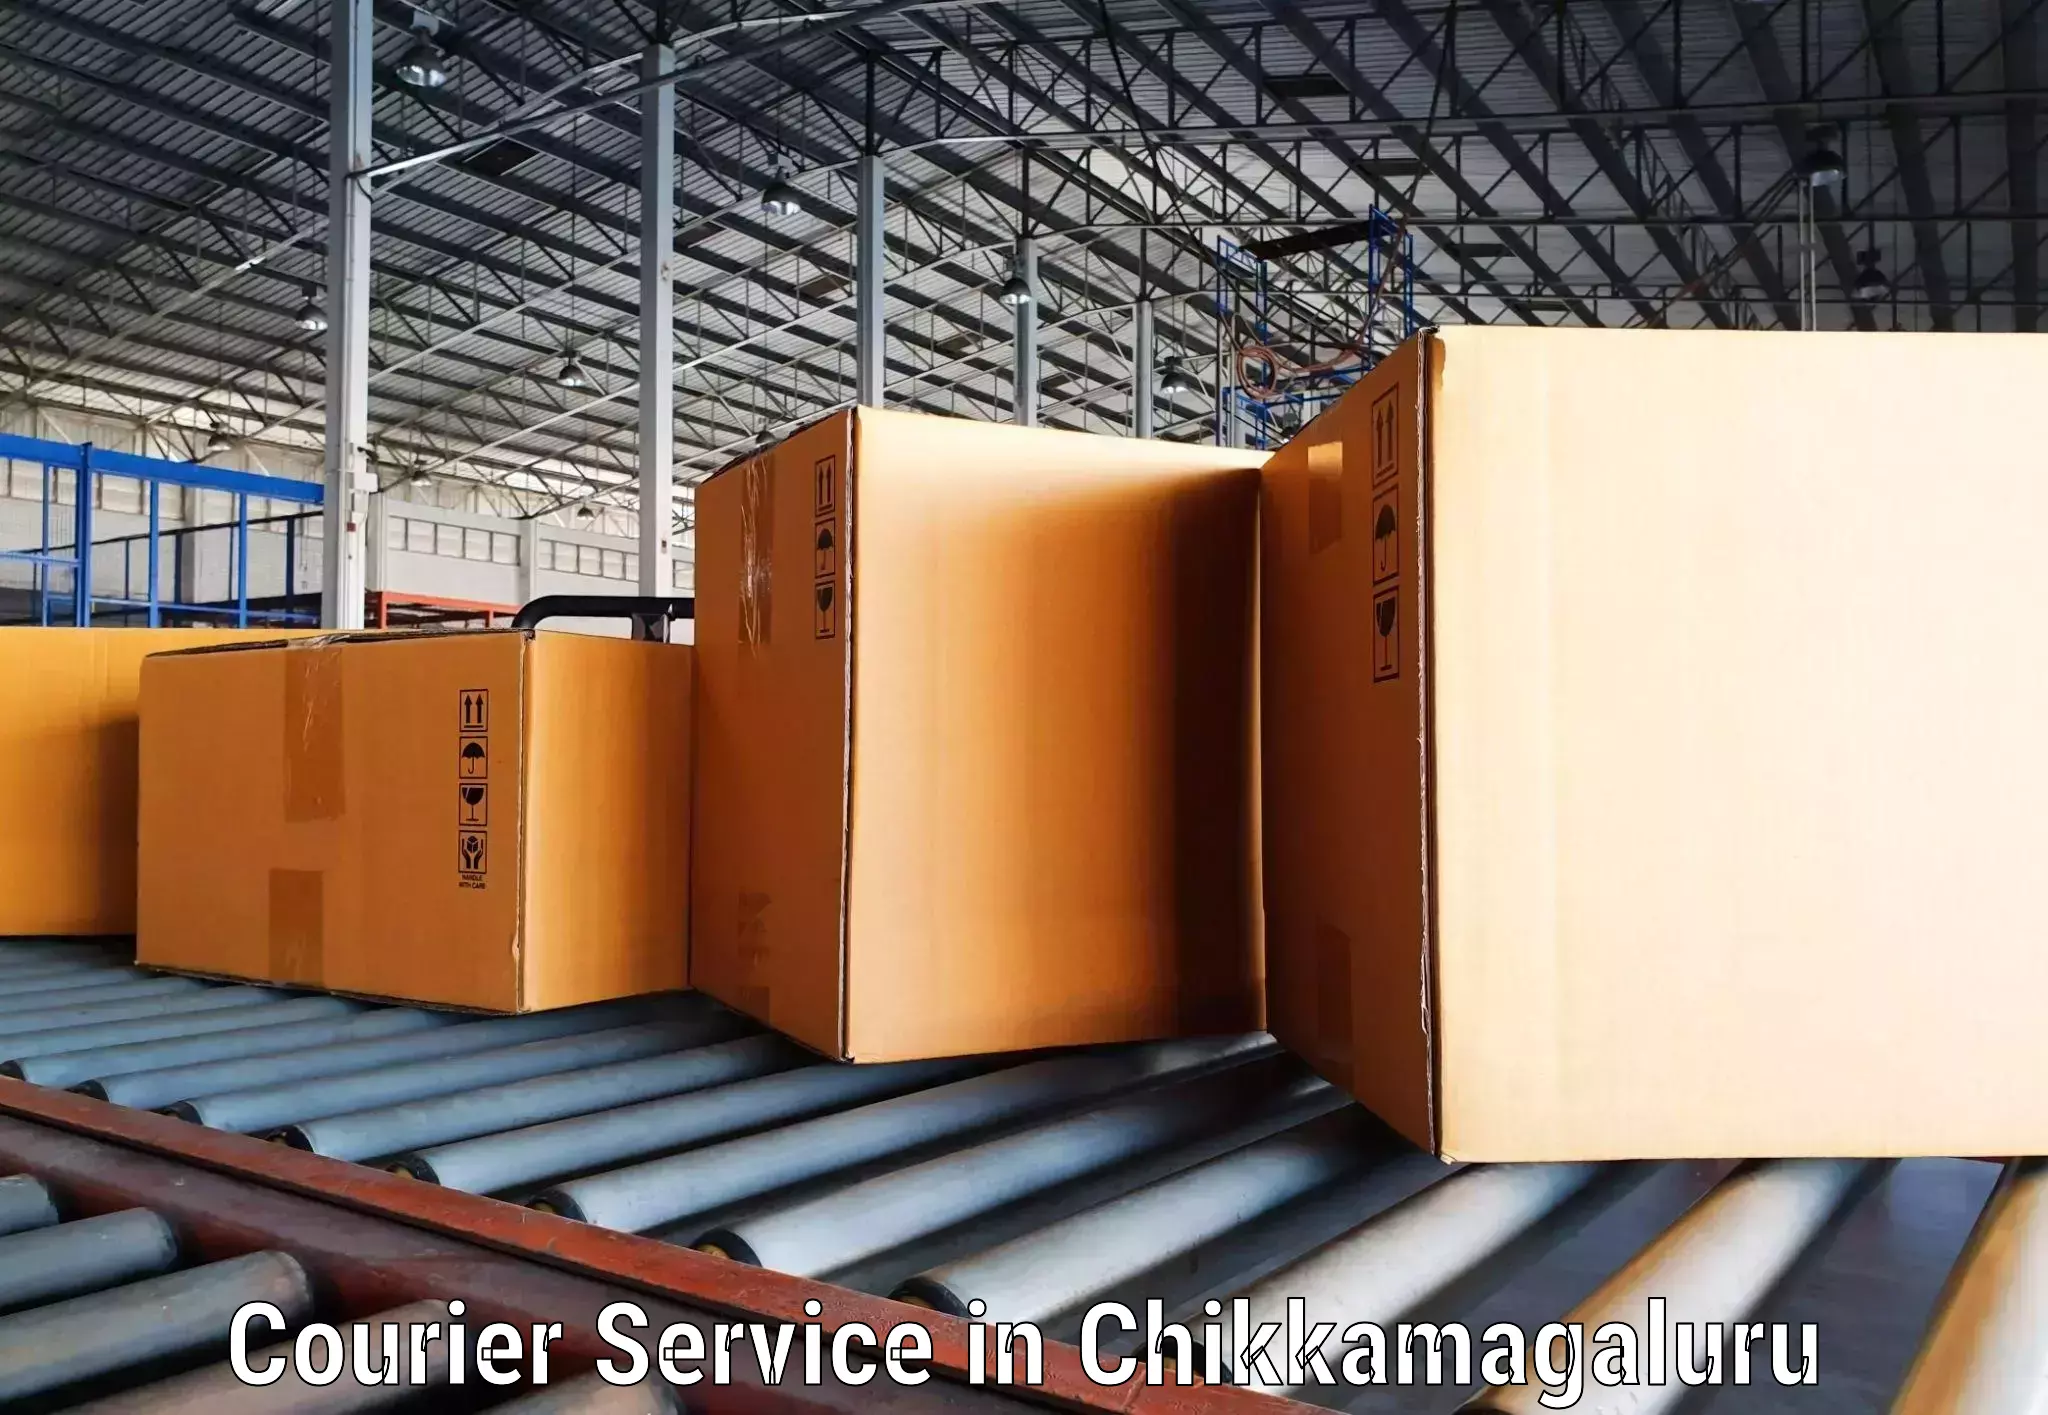 Supply chain delivery in Chikkamagaluru